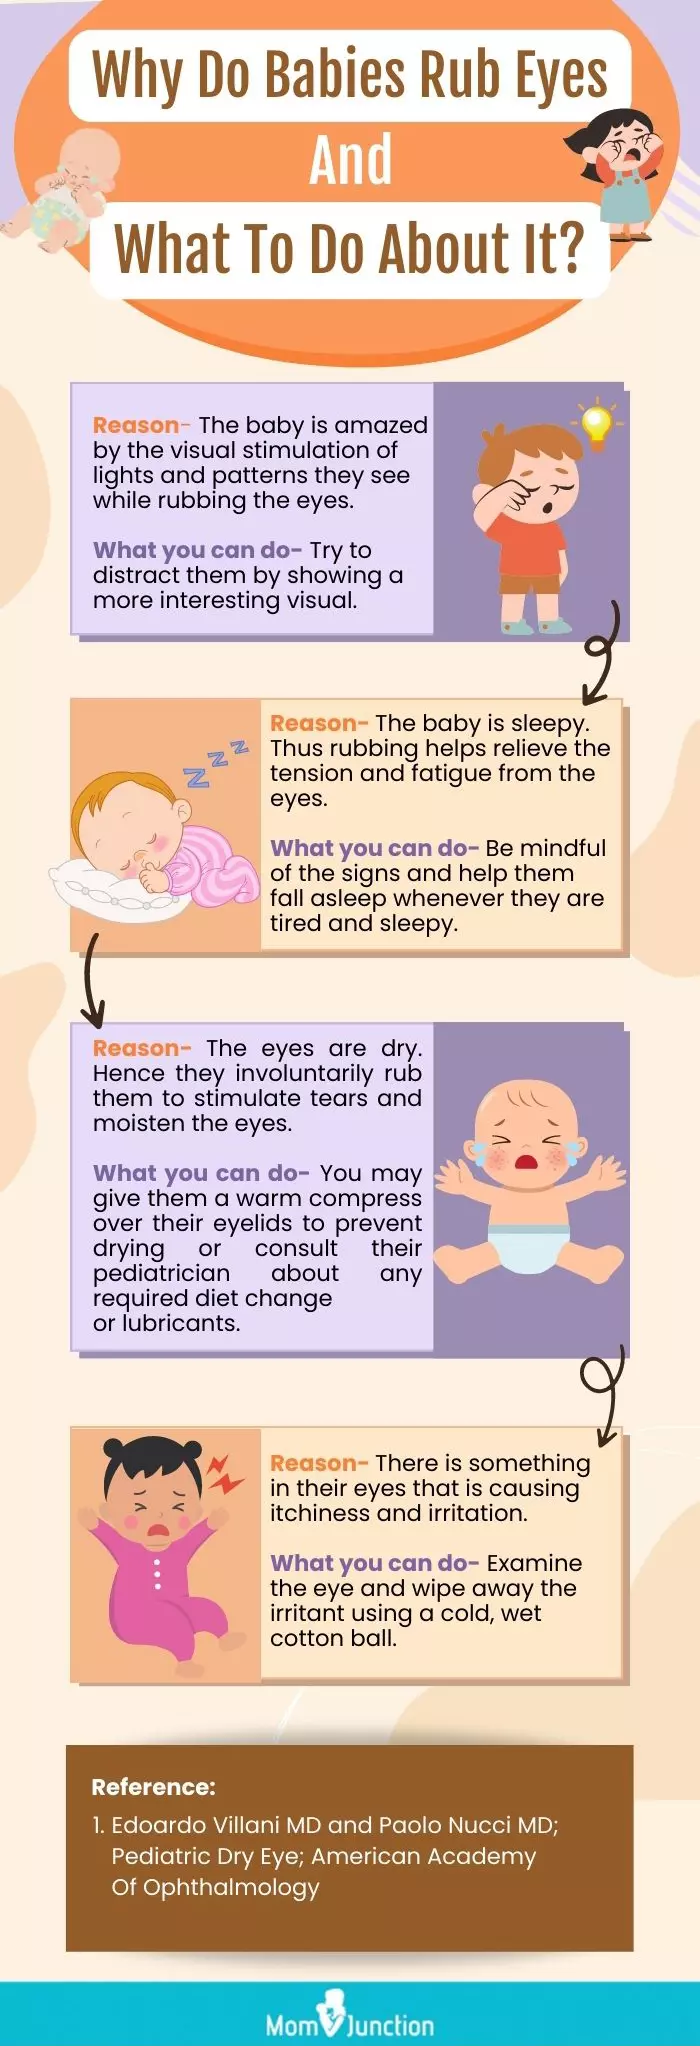 why do babies rub eyes and what to do about it (infographic)